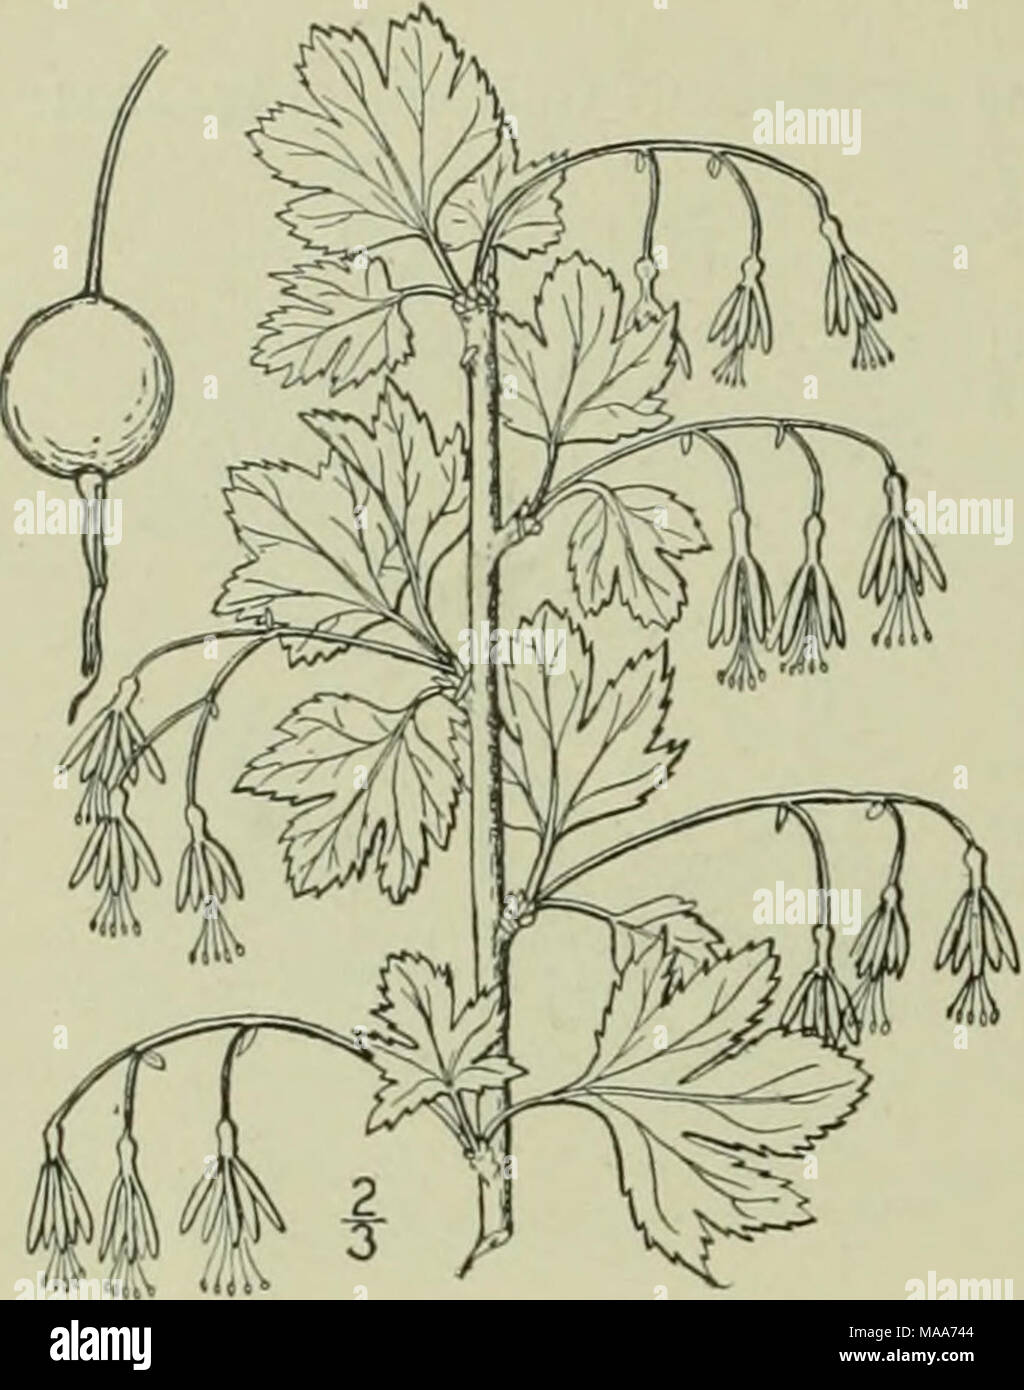 . An illustrated flora of the northern United States, Canada and the British possessions : from Newfoundland to the parallel of the southern boundary of Virginia and from the Atlantic Ocean westward to the 102nd meridian . 2. Grossularia missouriensis (Nutt.) Cov. &amp; Britt. Missouri Gooseberry. Fig. 2206. Ribes gracile Pursh, Fl. Am. Sept. 165. 1814. Not Michx. Ribcs missouriensis Nutt.; T. &amp; G. Fl. N. A. i: 548. 1840. Grossularia missouriensis Cov. &amp; Britt. N. A. Fl. 22: 221. 1908. Nodal spines slender, solitary, or 2-3 together, reddish, 3&quot;S&quot; long or more. Prickles gener Stock Photo